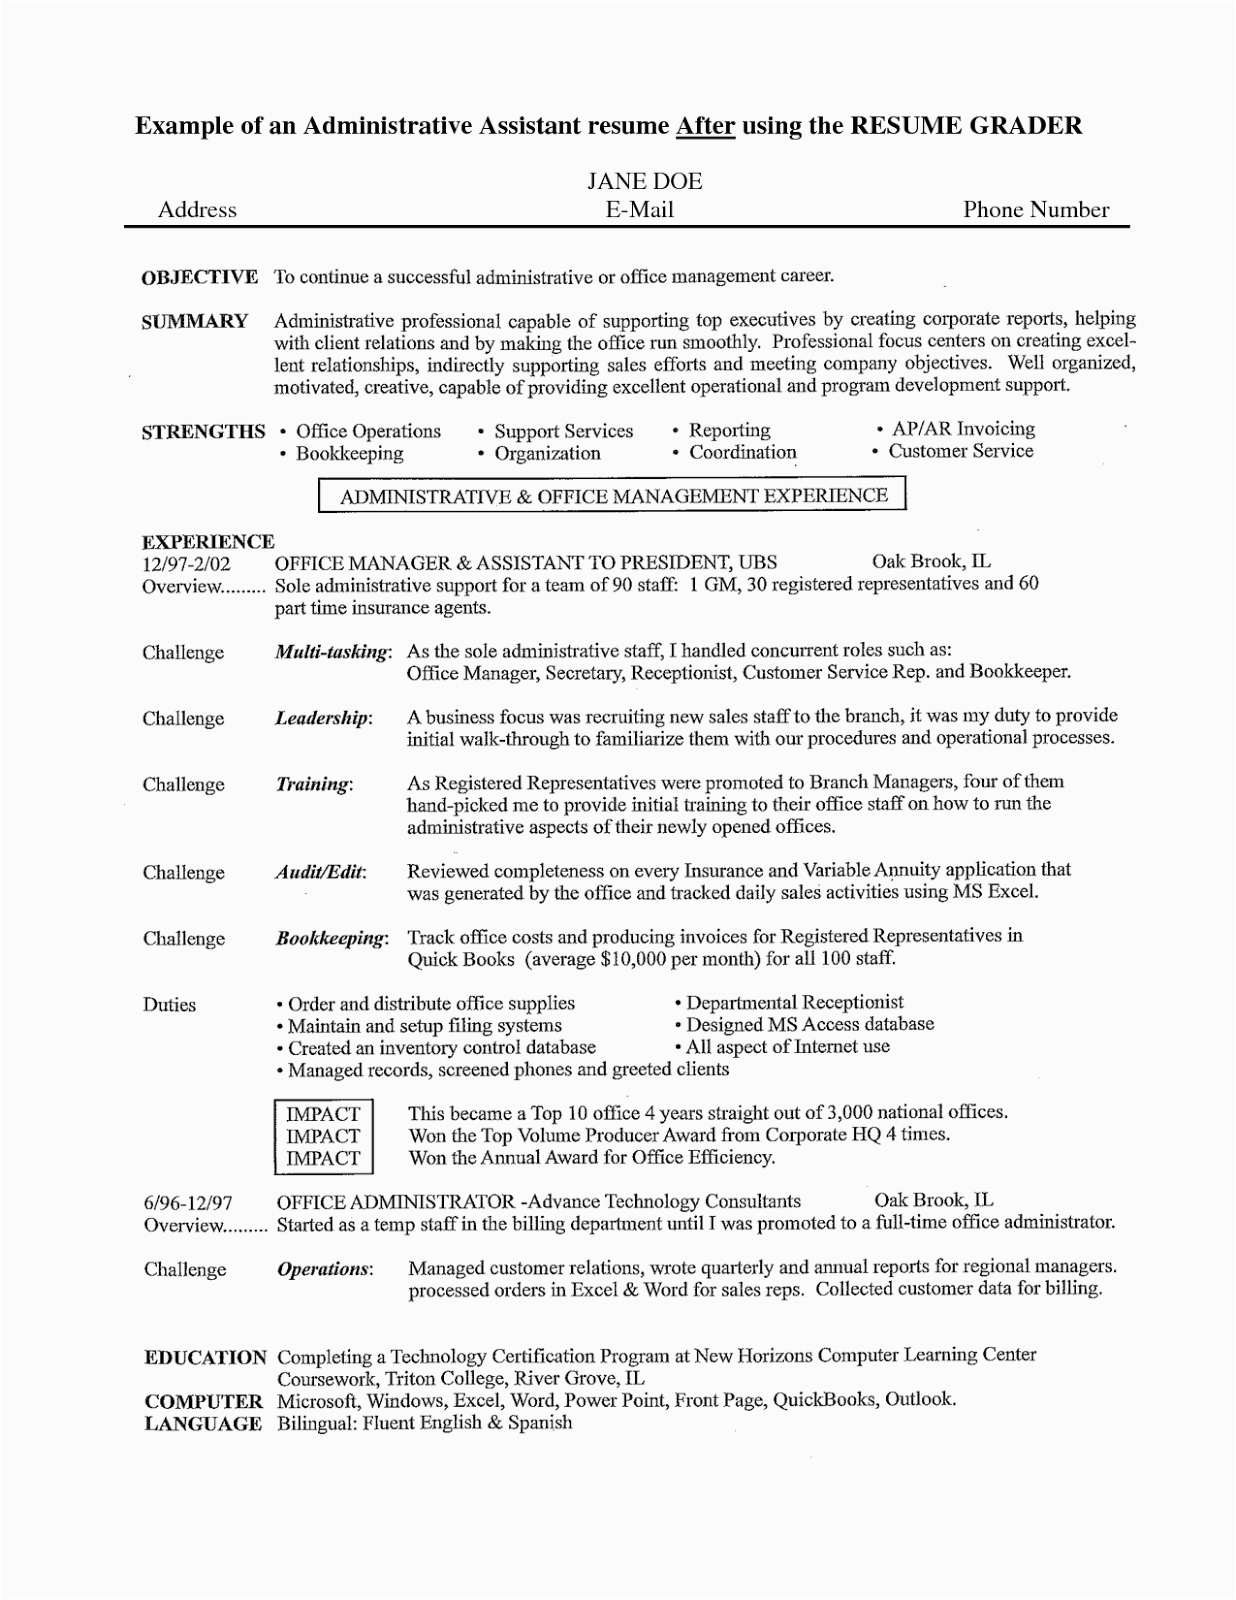 Sample Objective for Resume Administrative assistant Sample Objective Resume for Administrative assistant